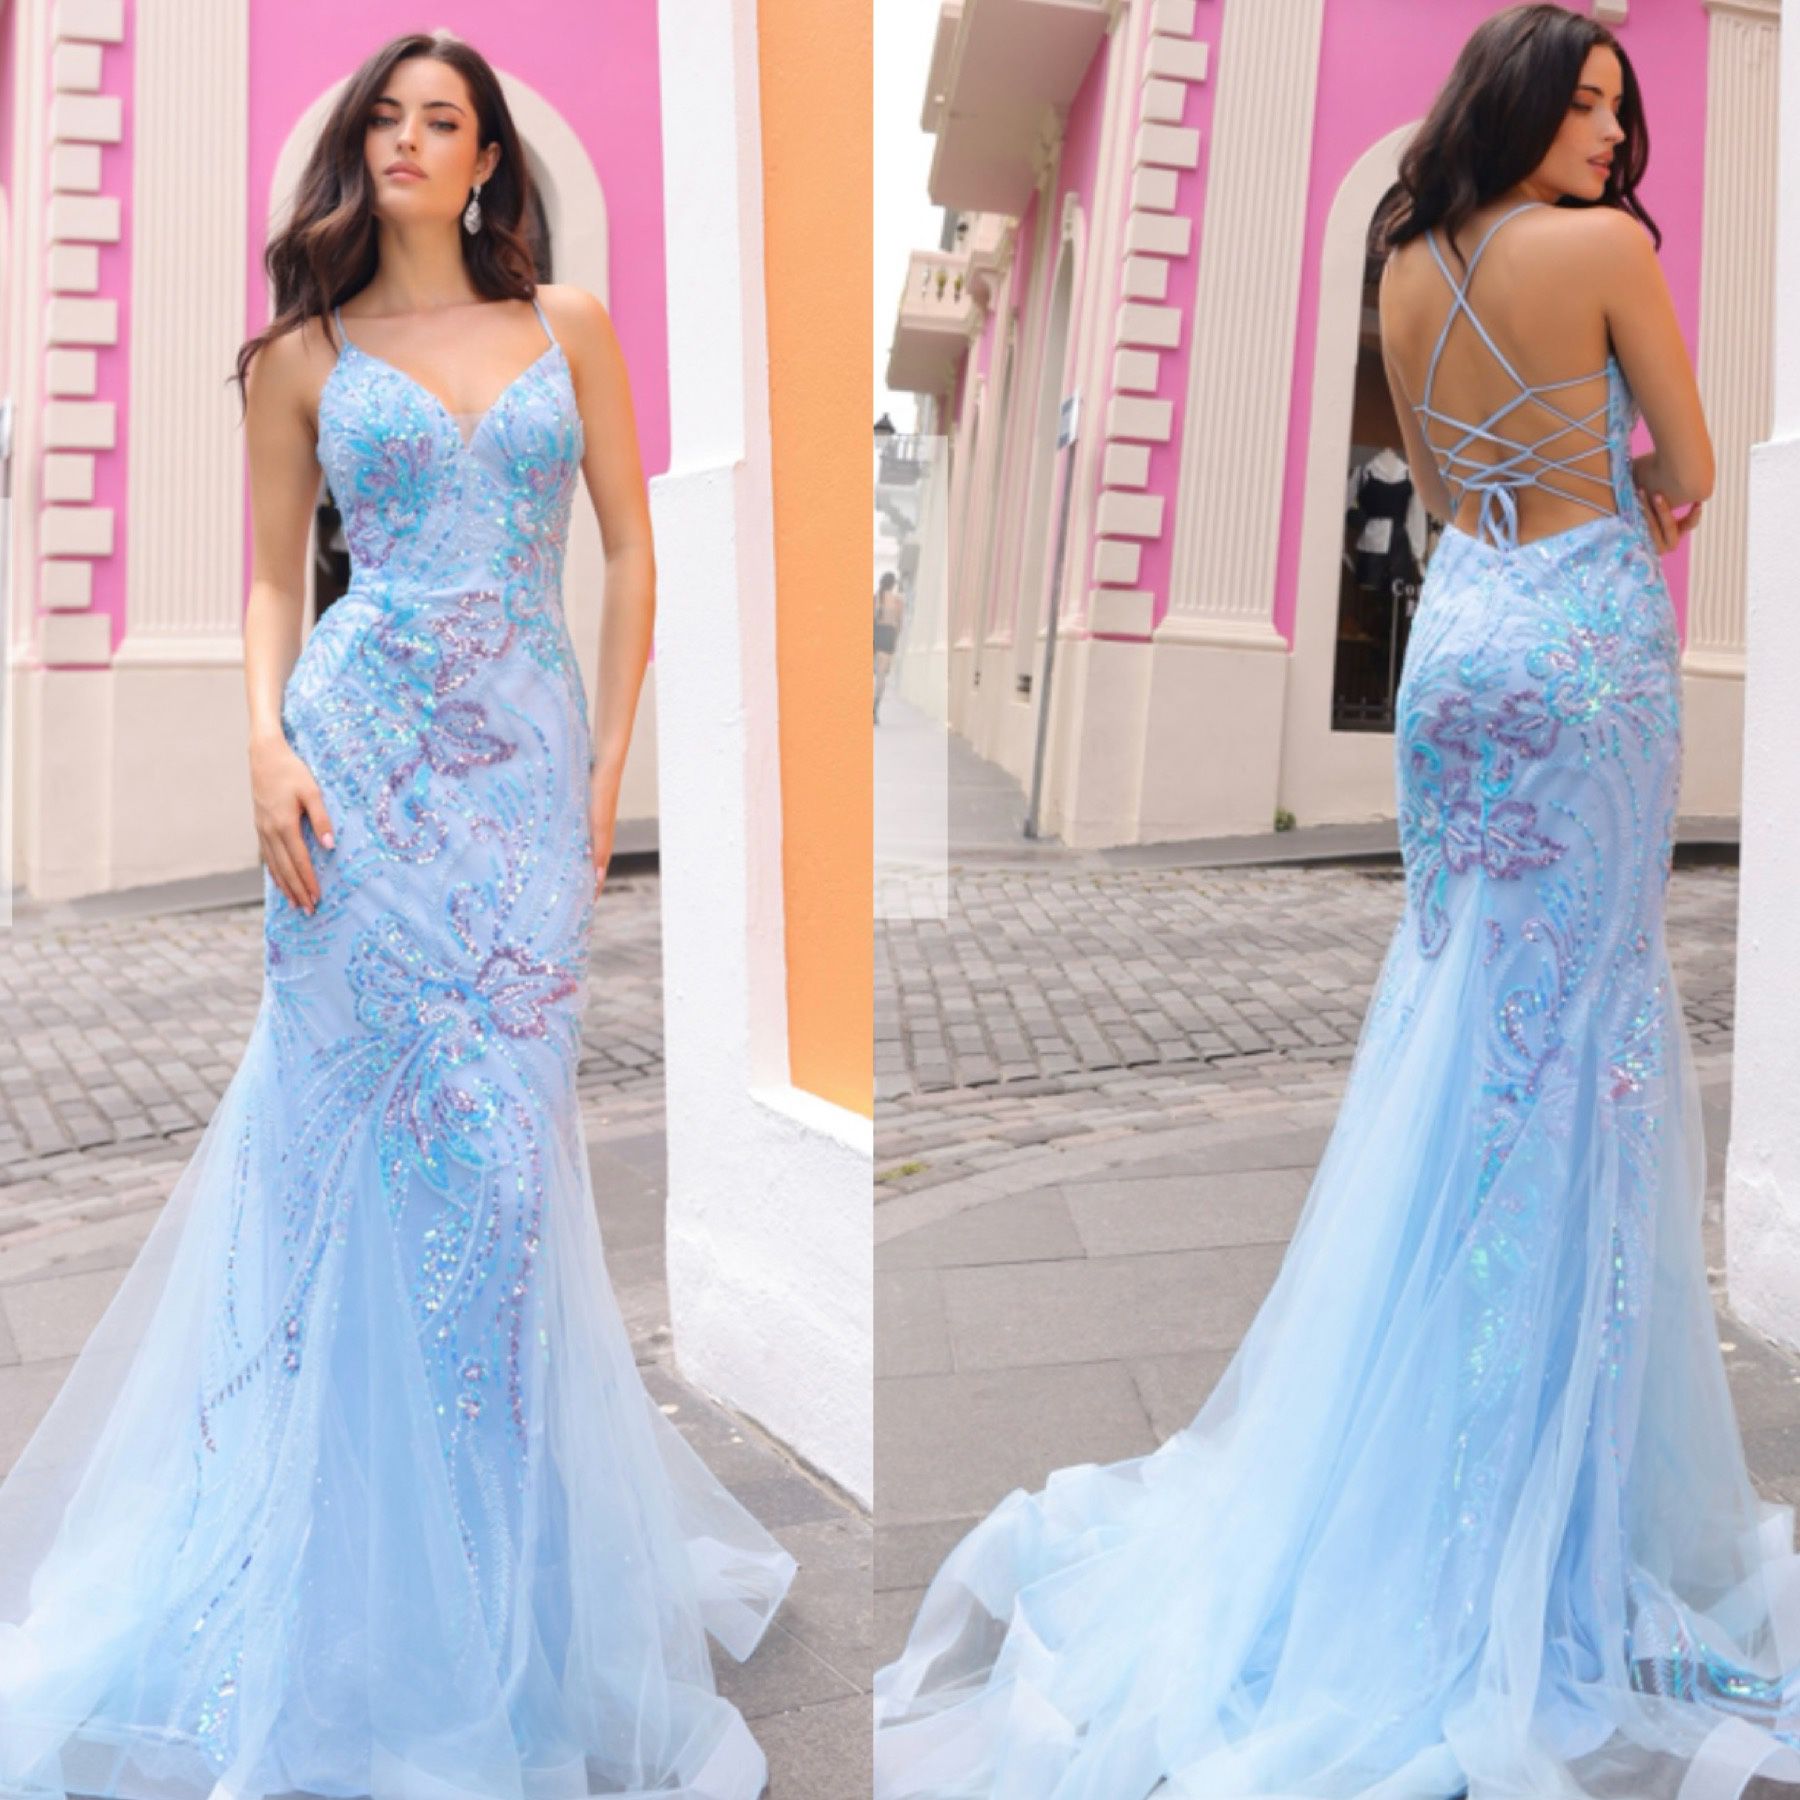 New With Tags Sequin Floral Appliqué Bodice & Strappy Back With Tulle Long Formal/Prom Dress $315